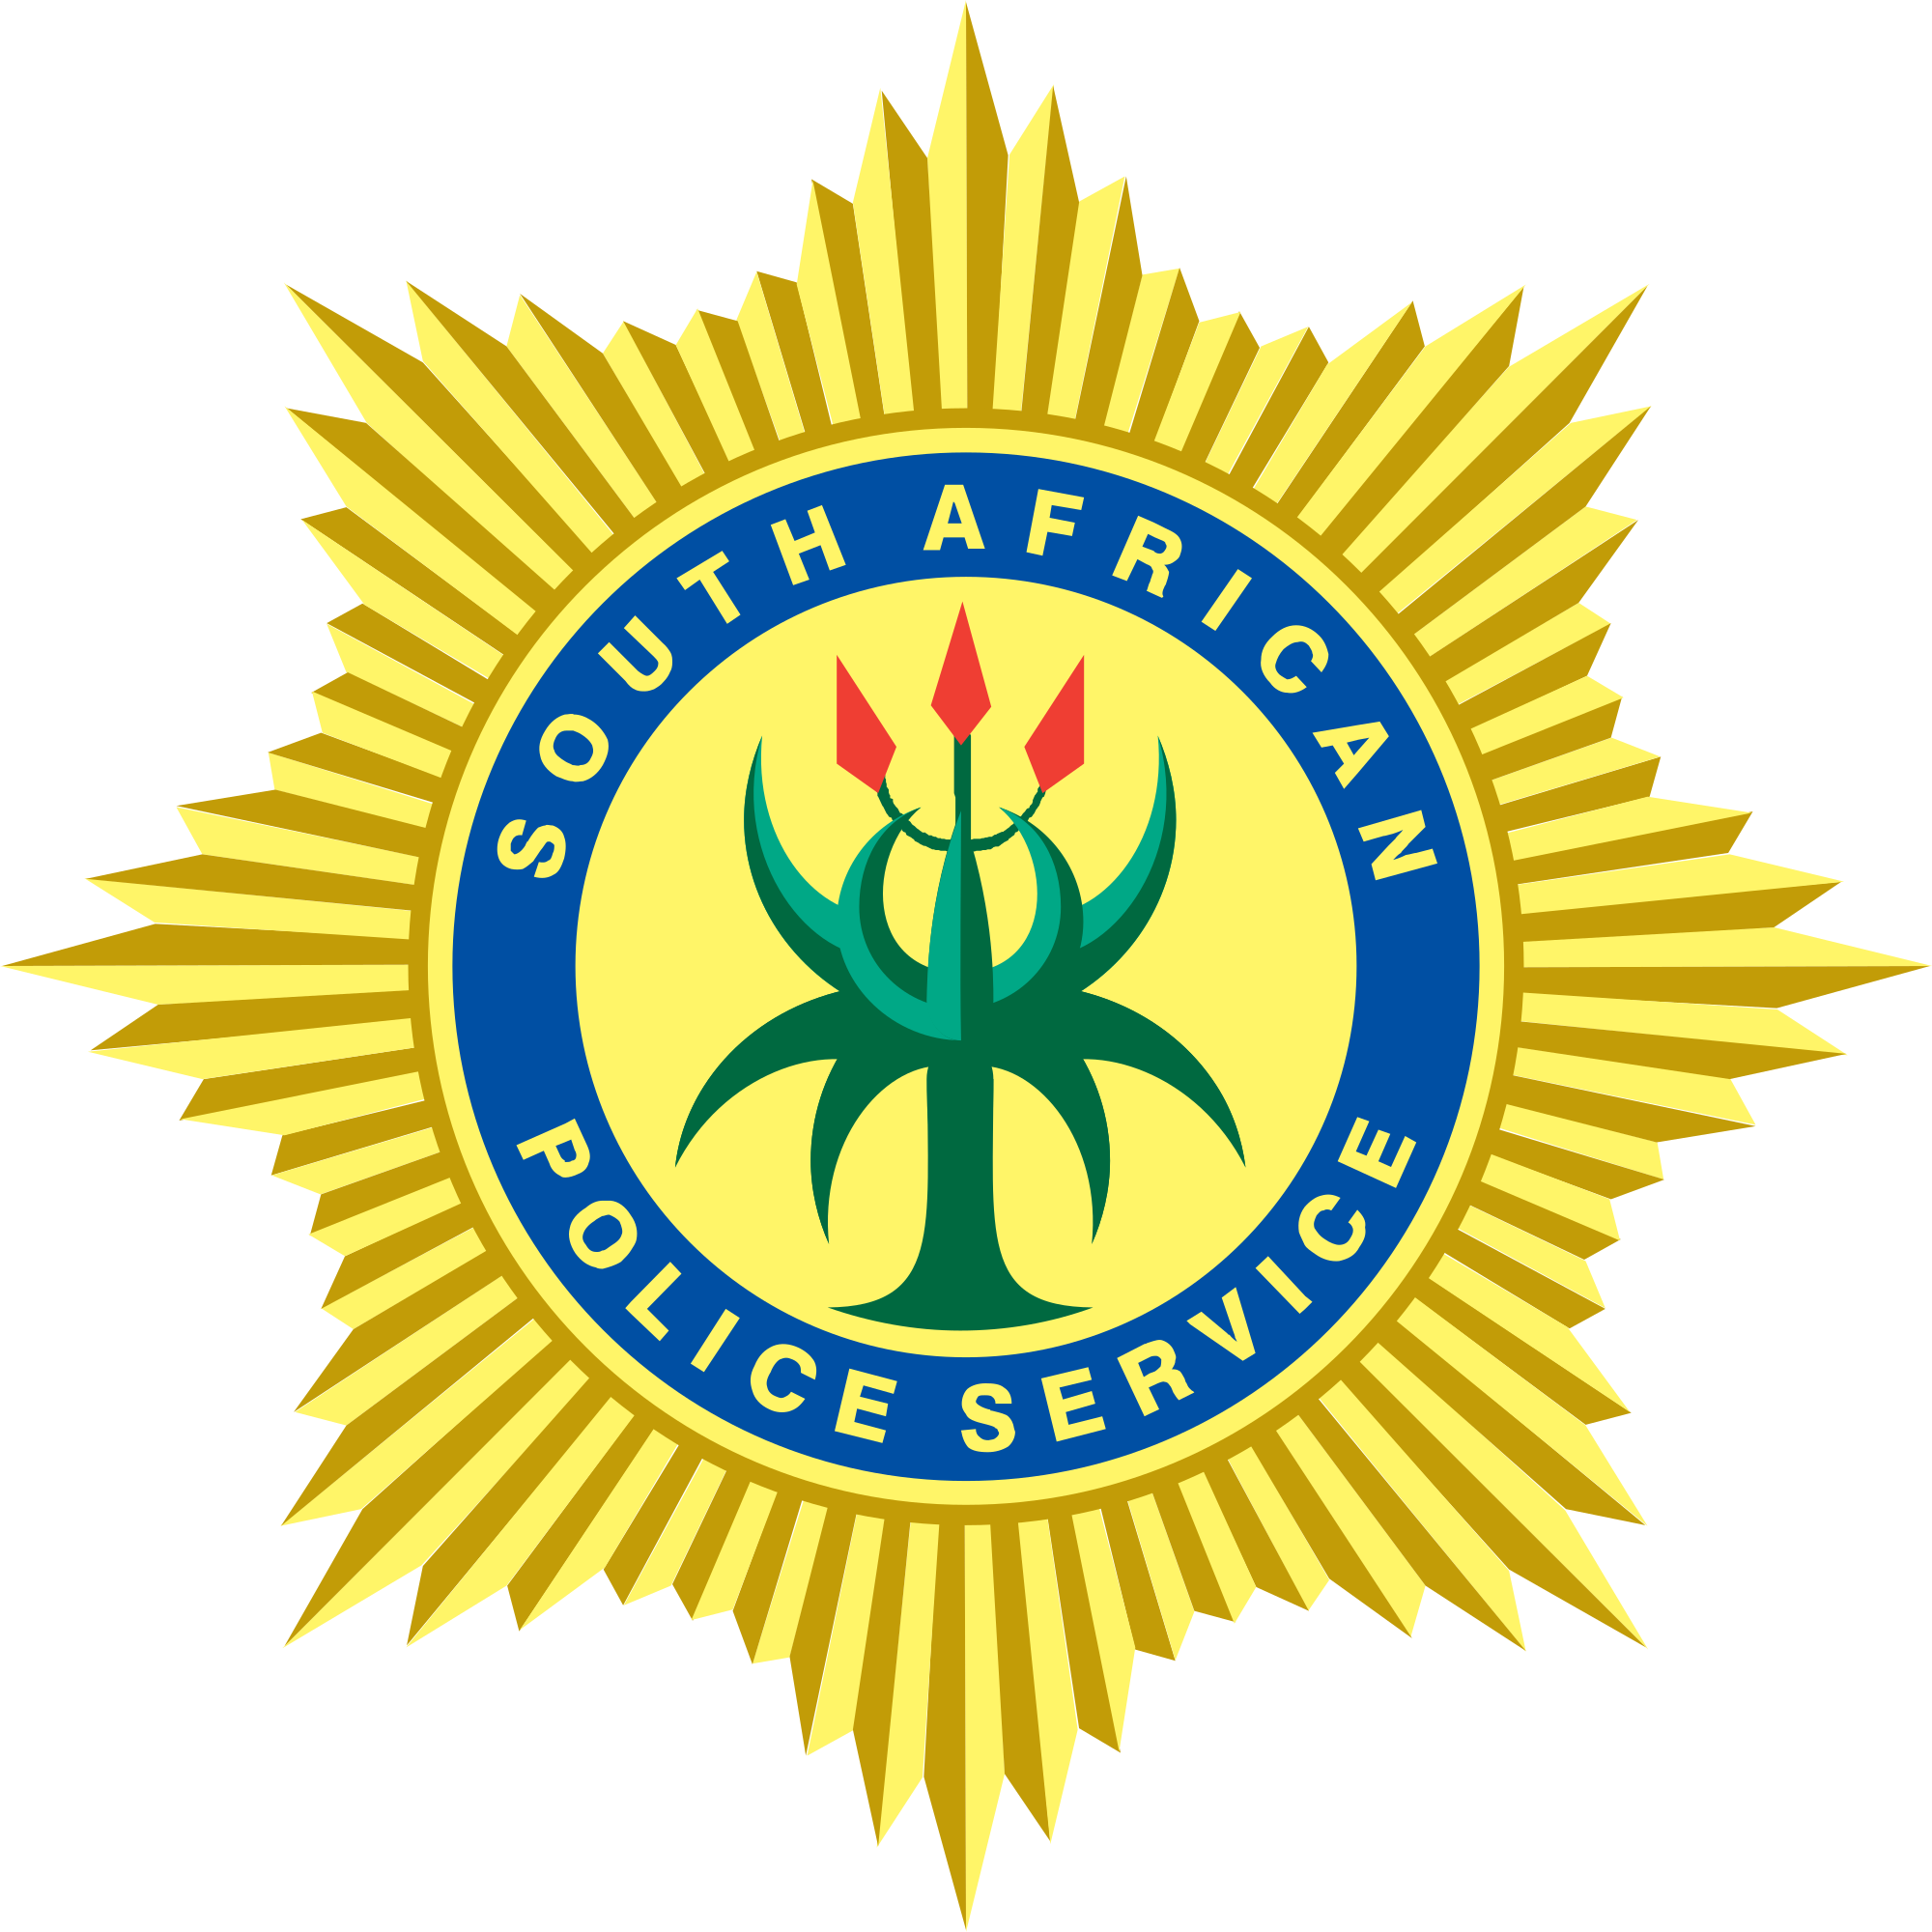 Two Suspects Arrested In Police Shootout In Lamontville - South African Police Service (2000x2000)